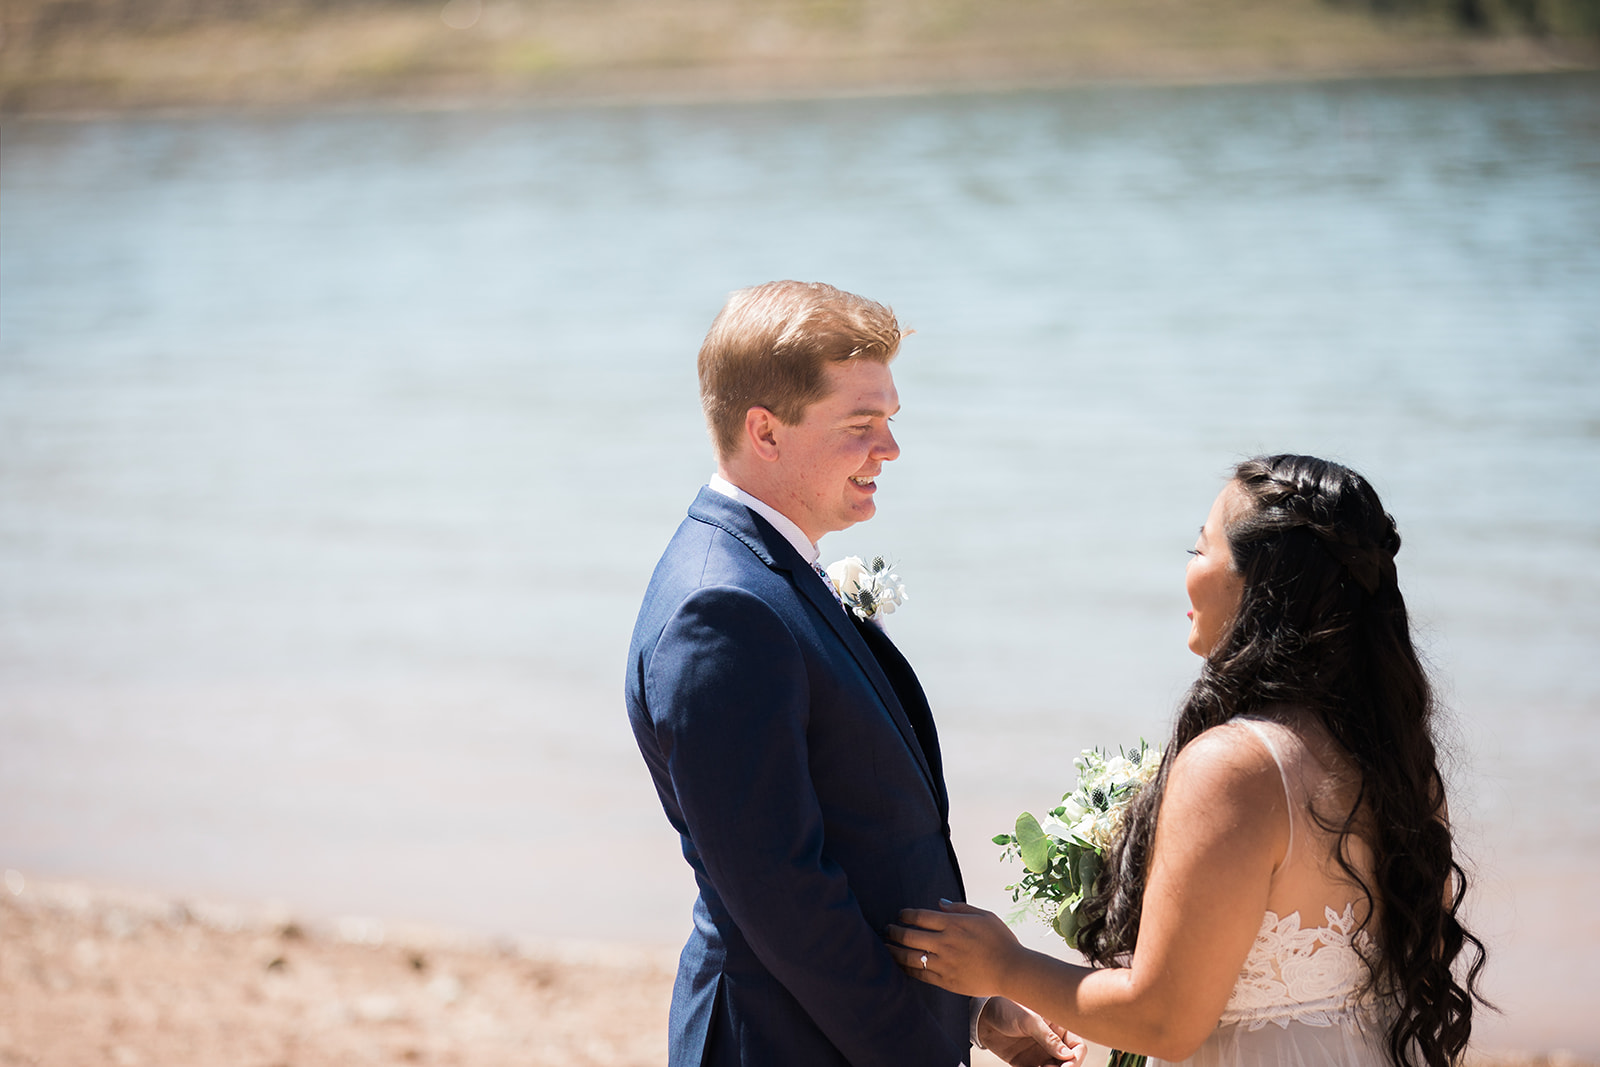 Colorado mountain couple sees each other for first time ahead of wedding